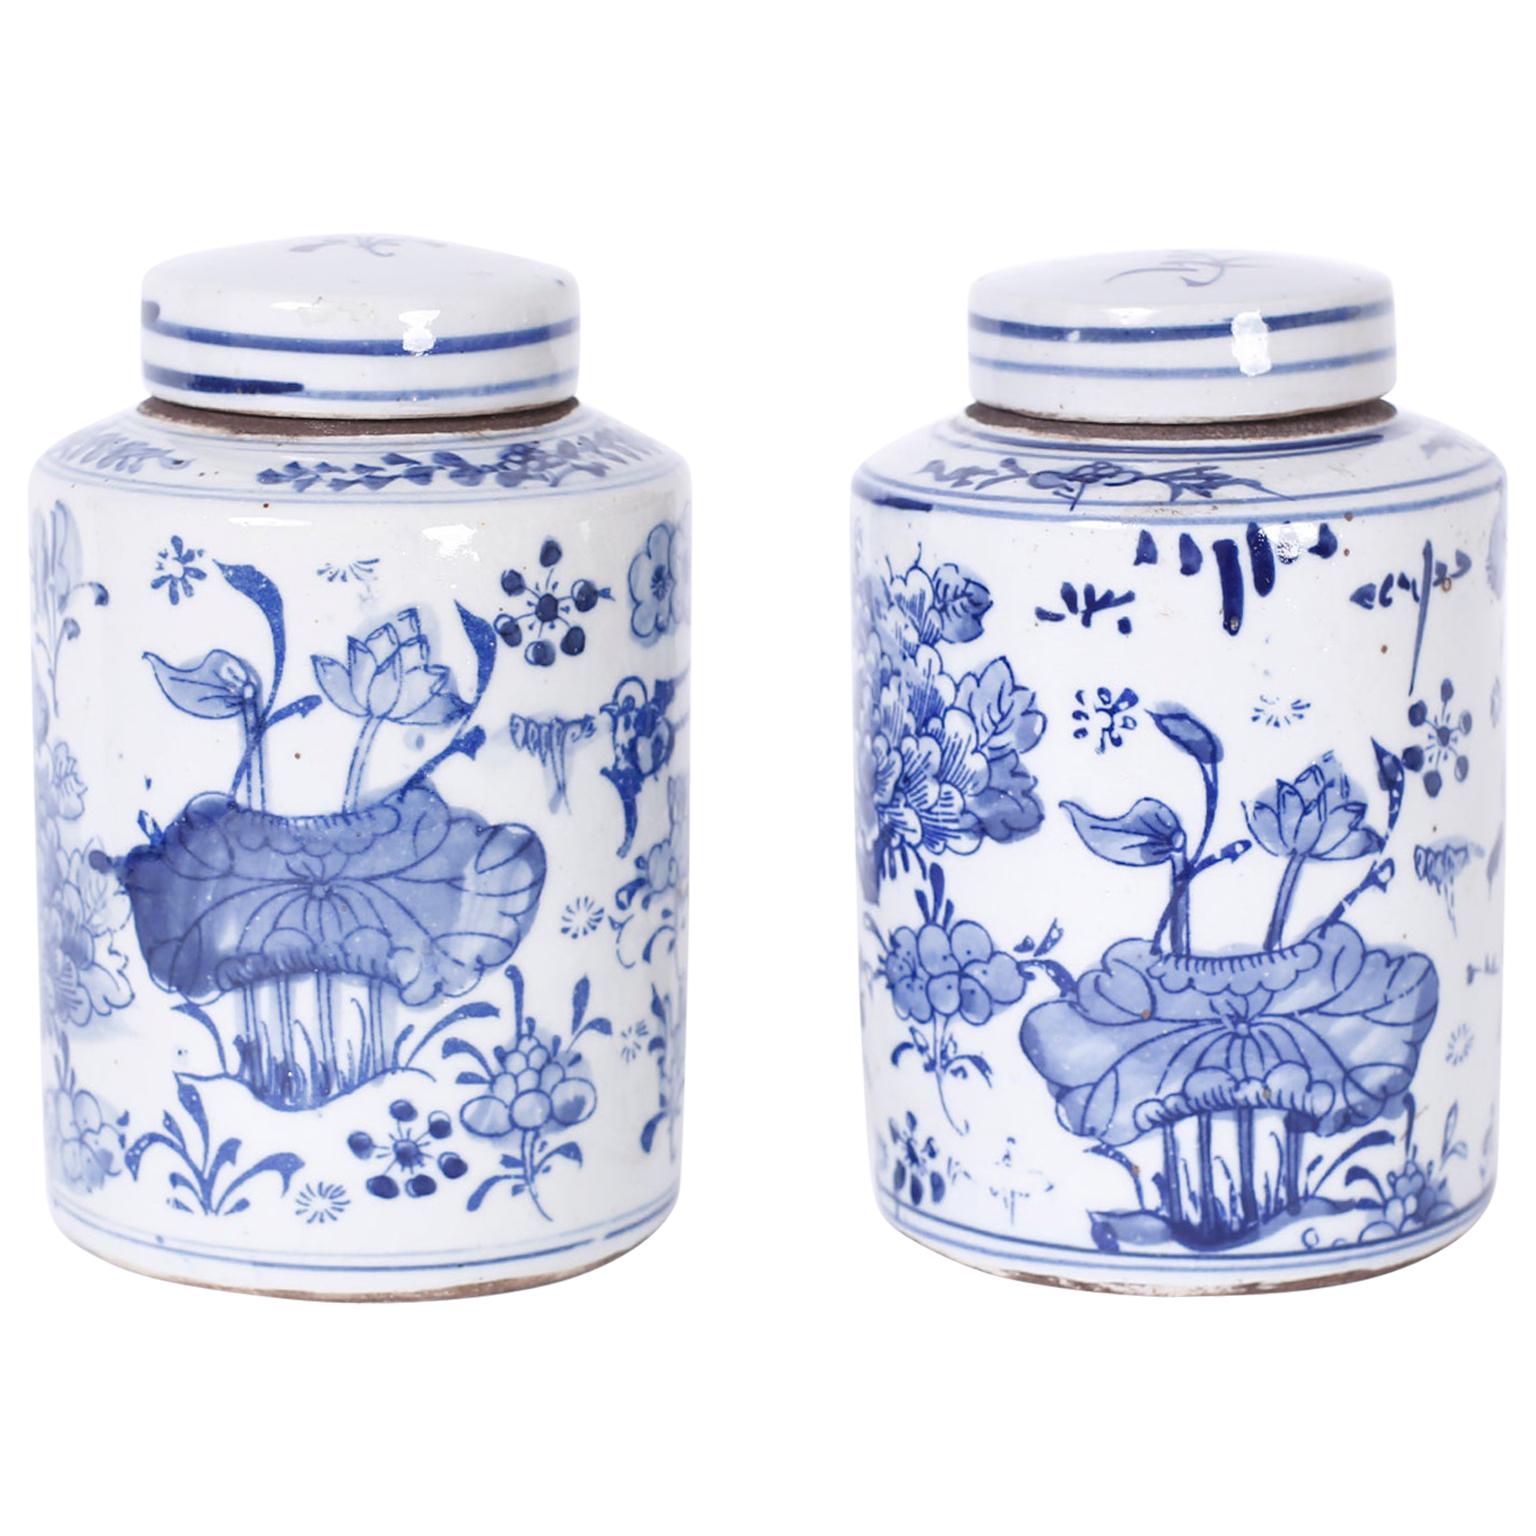 Pair of Blue and White Porcelain Jars